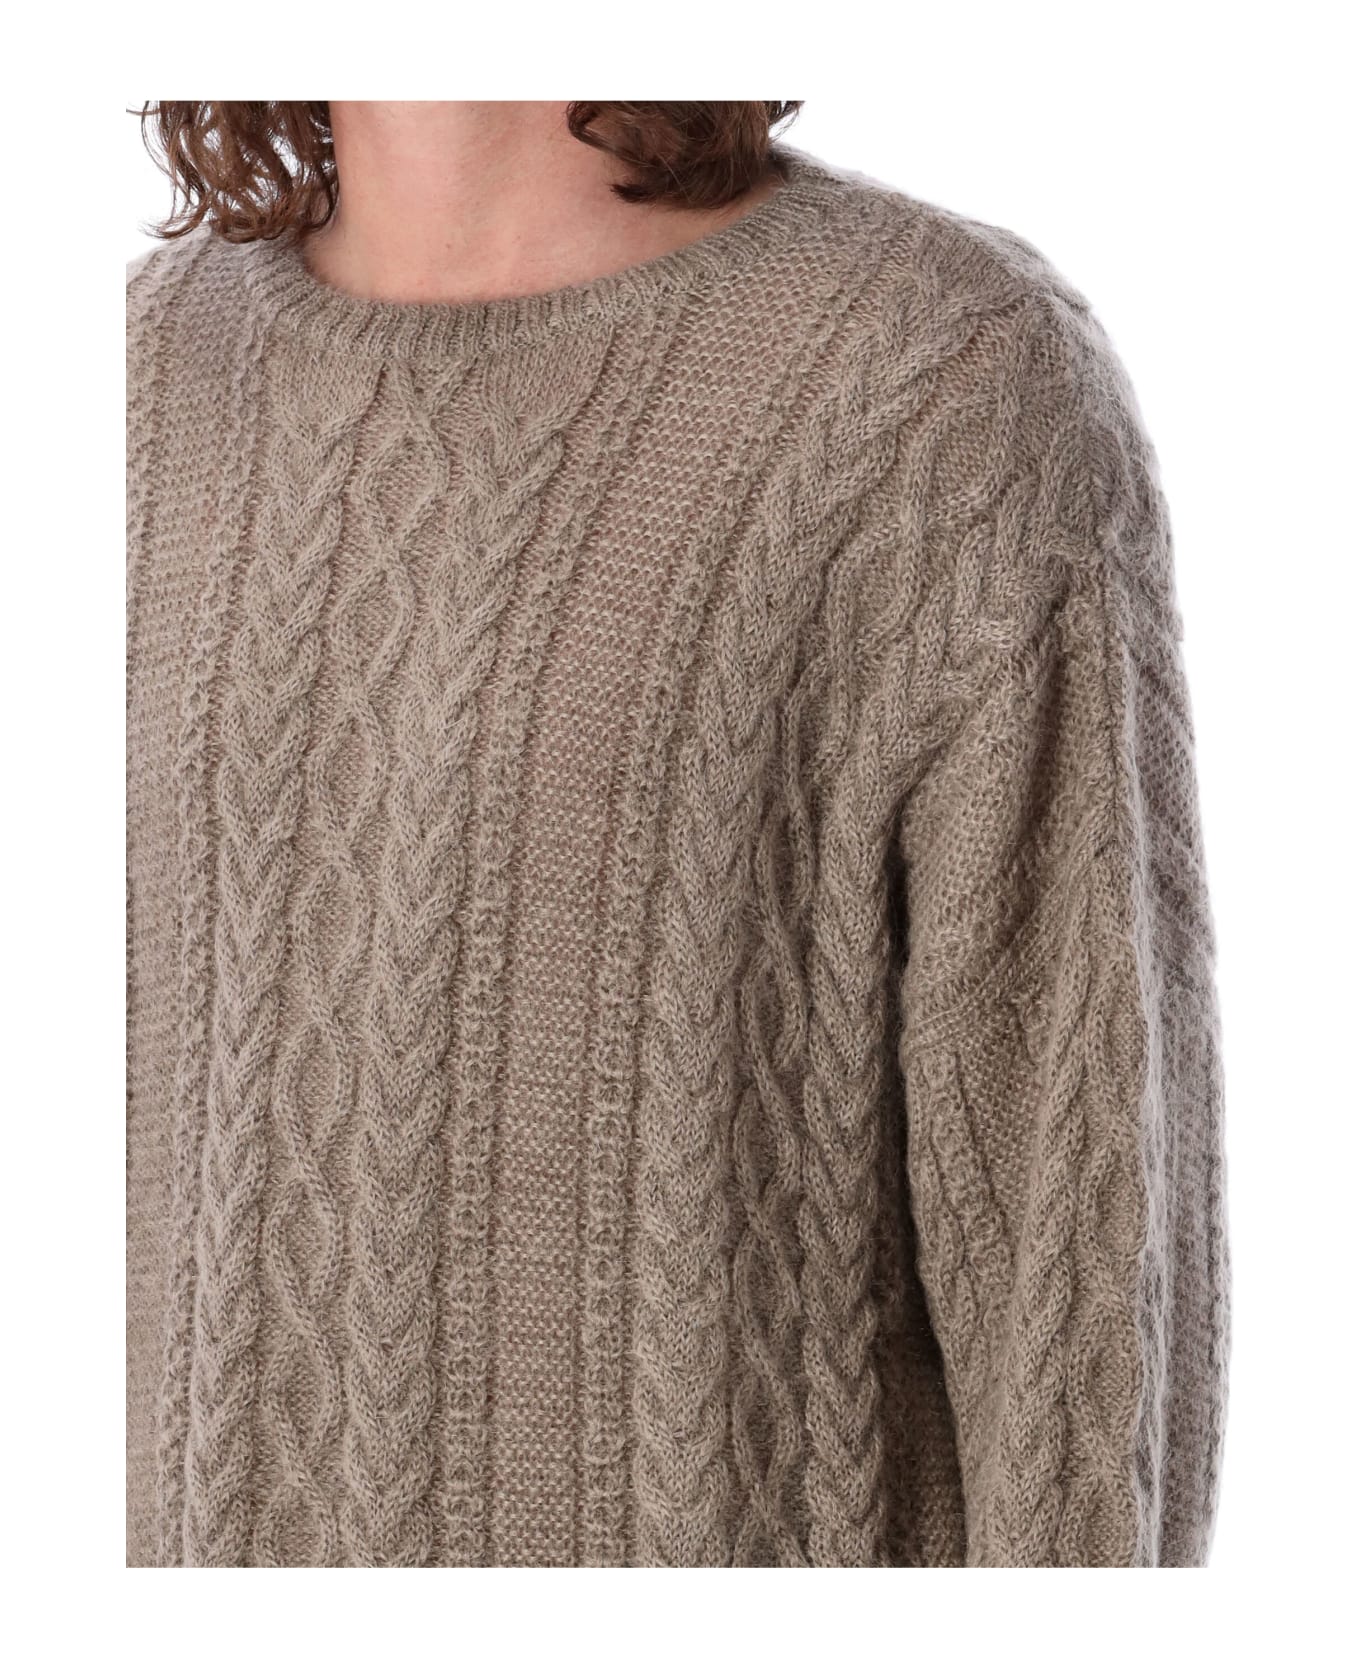 Undercover Jun Takahashi Cable Knit Sweater - GREY BEIGE ニットウェア